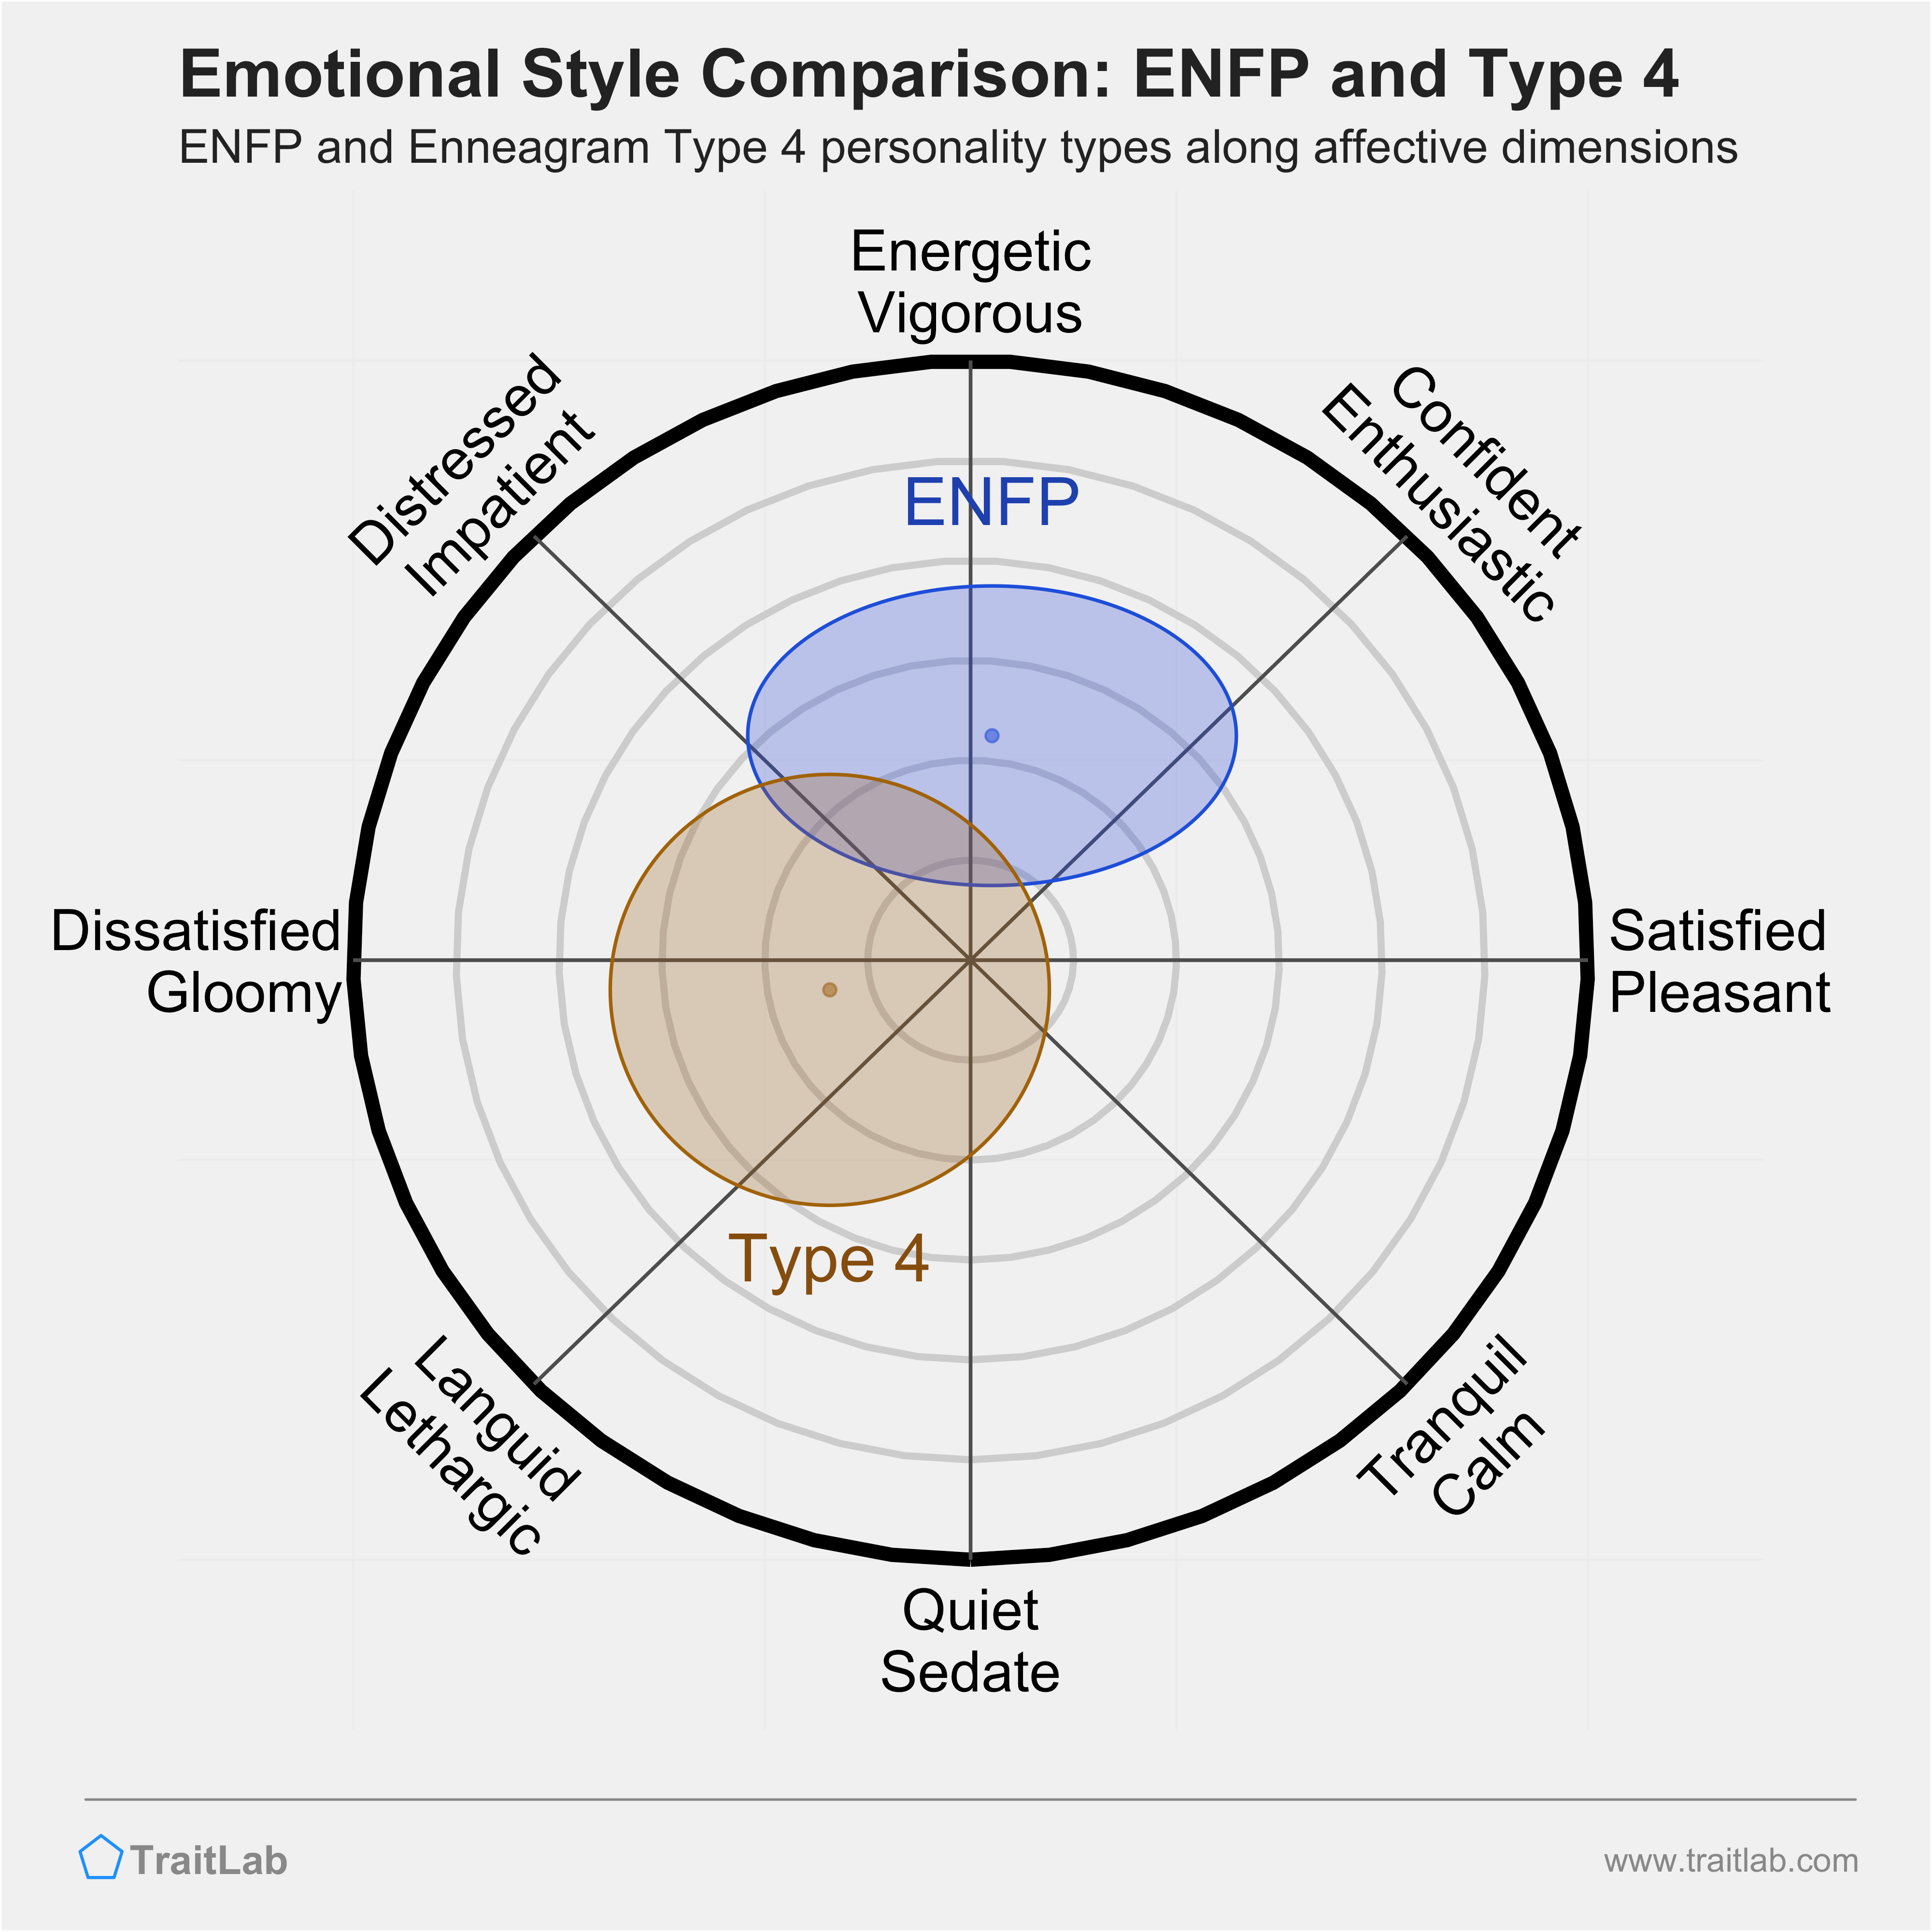 ENFP and Type 4 comparison across emotional (affective) dimensions